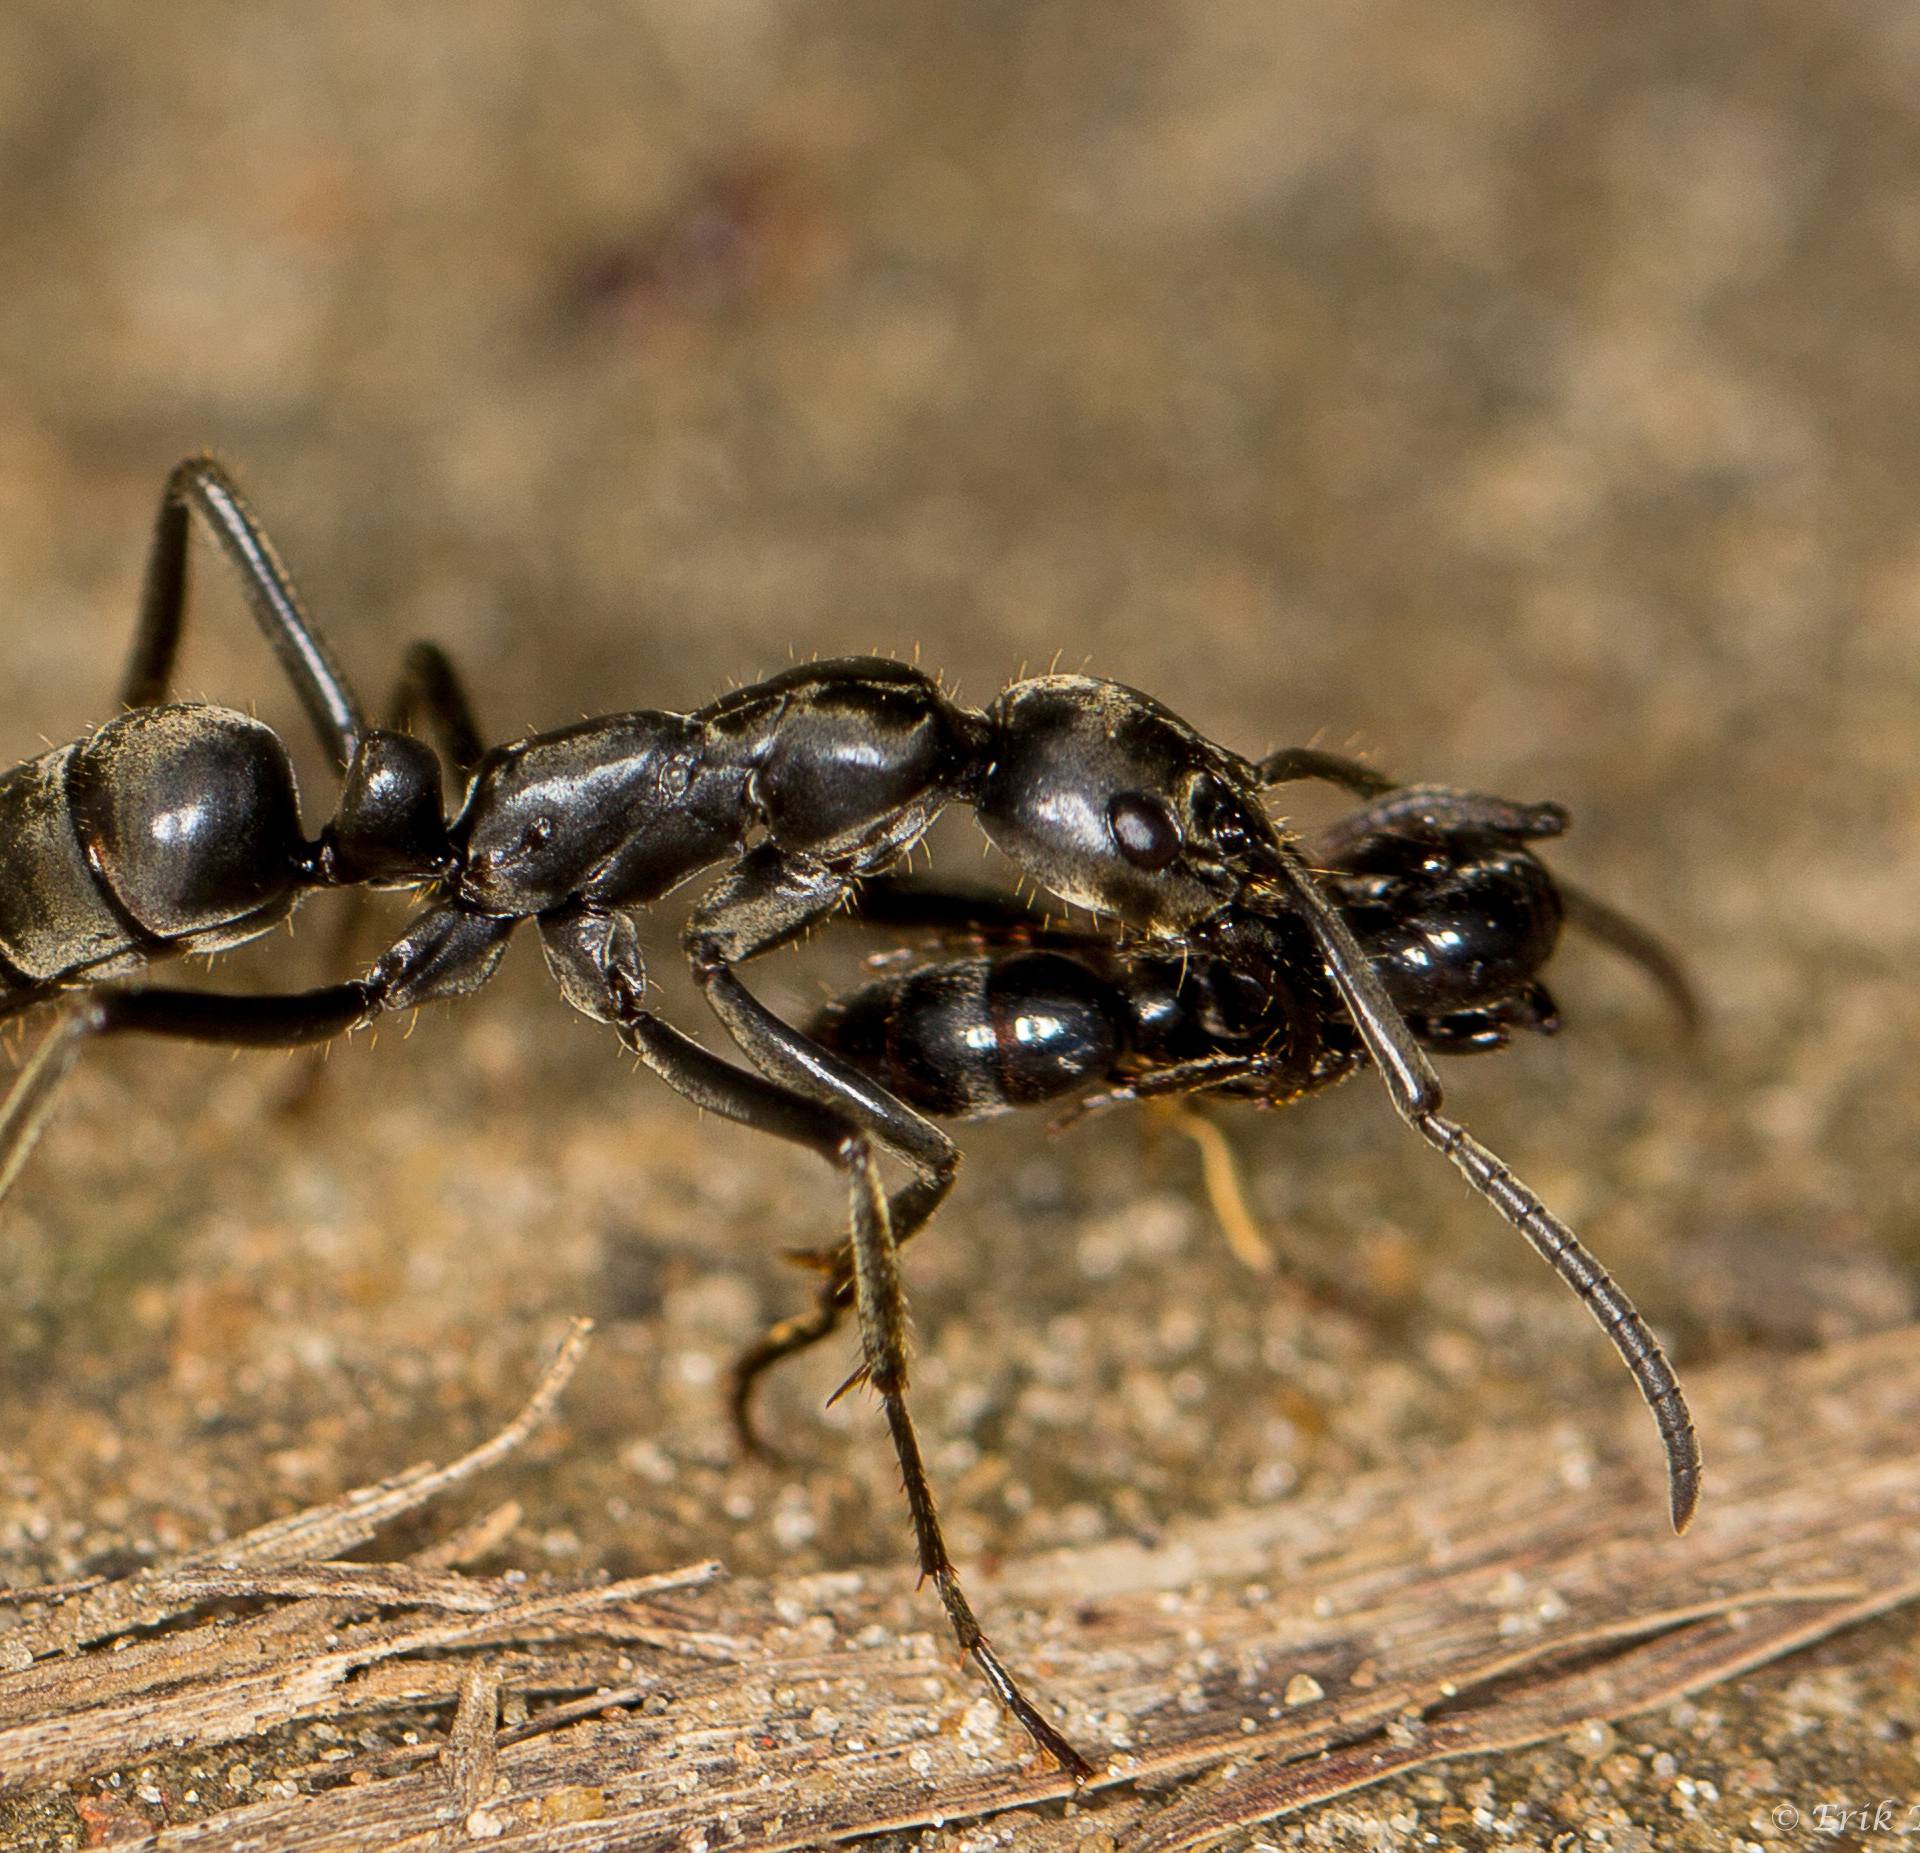 Handout of a Matabele ant is seen carrying an injured mate back to the nest after a raid